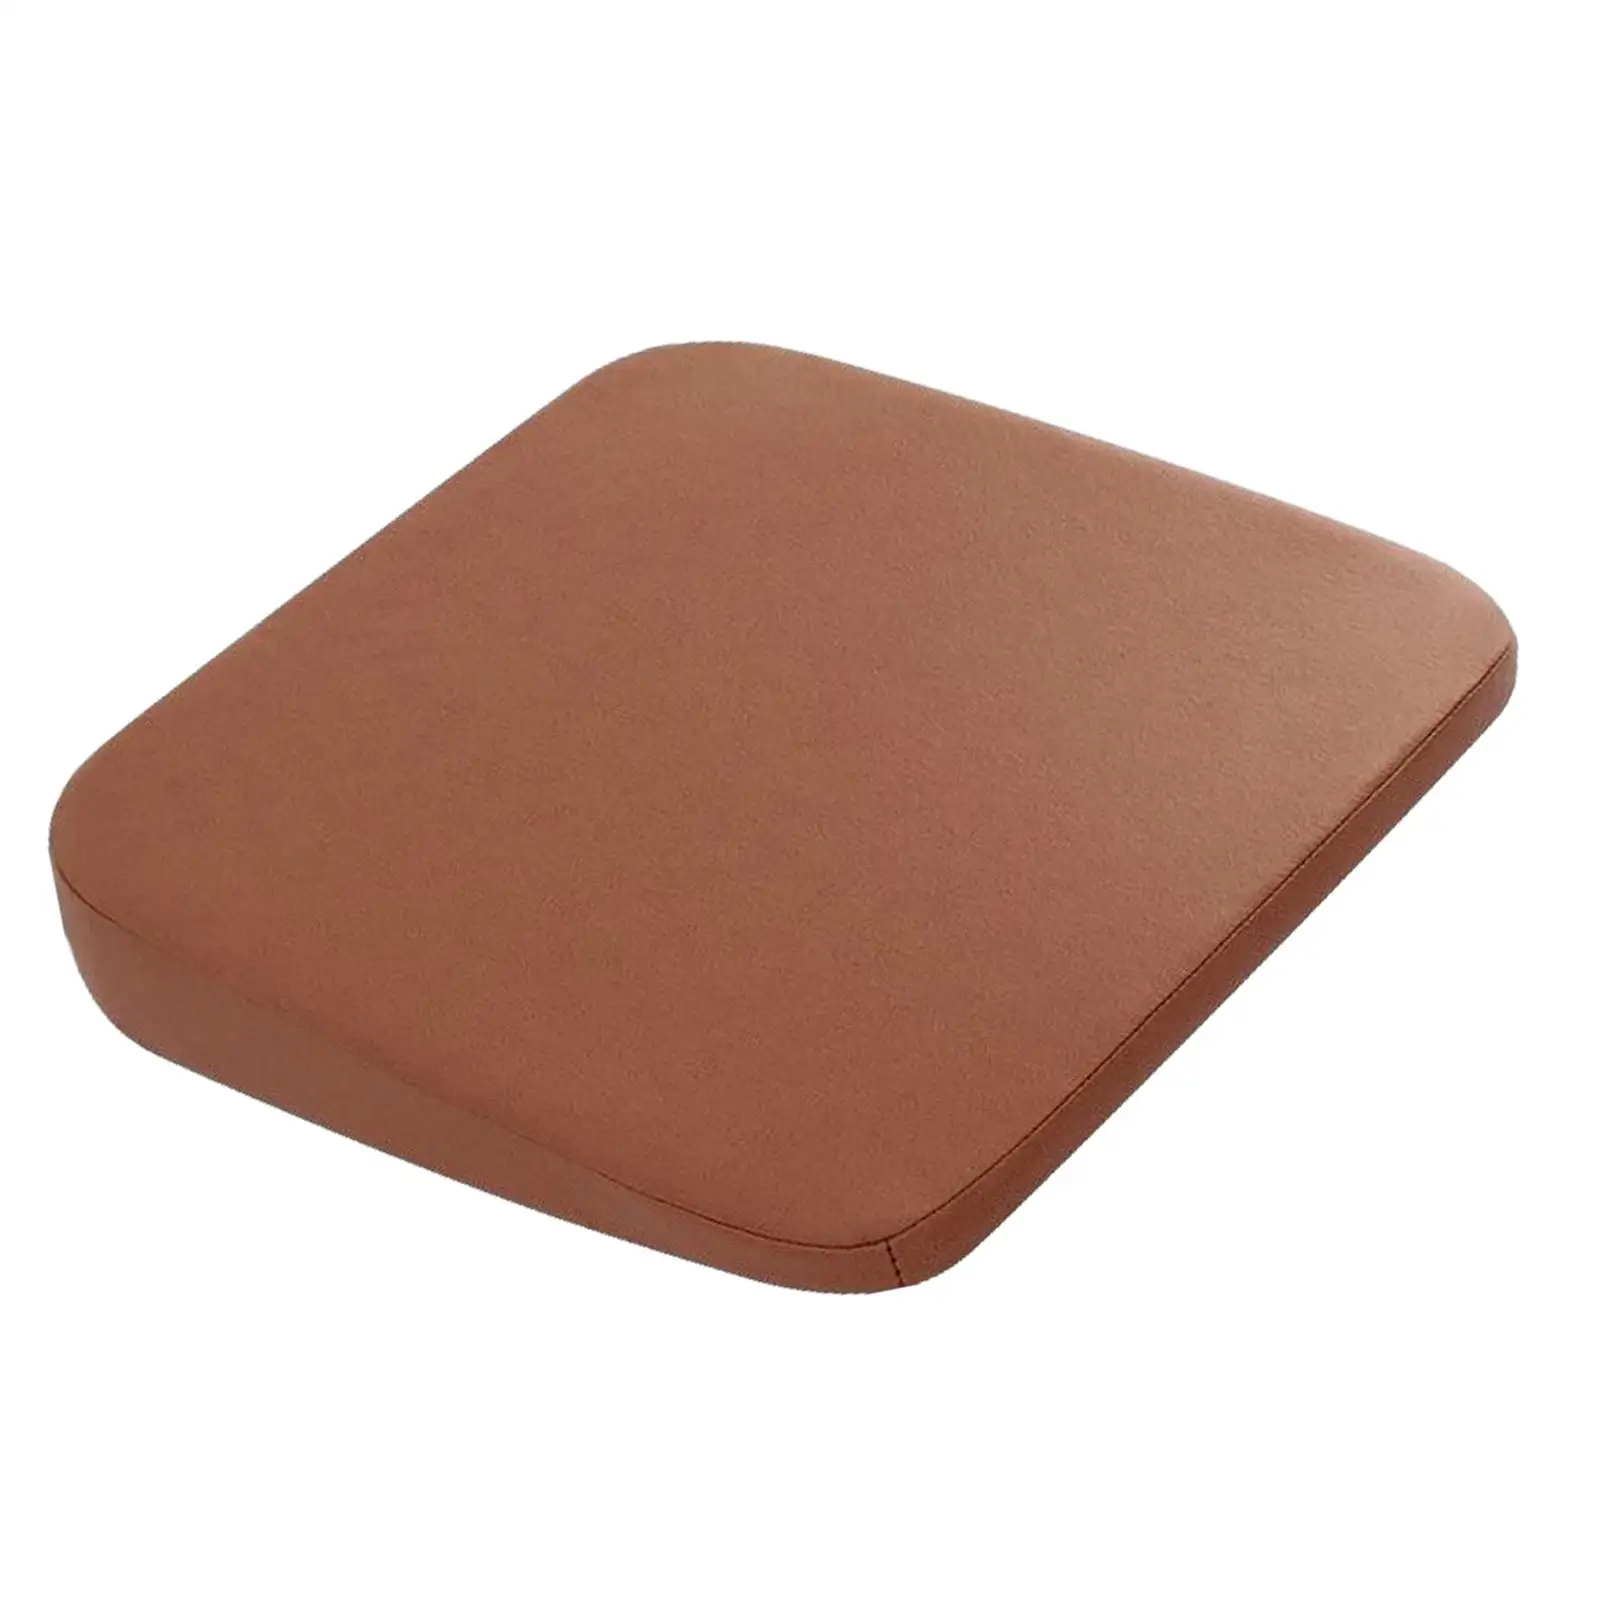 Car Booster Seat Cushion Inclined Plane Seat Pad Office/Home Chair Seat